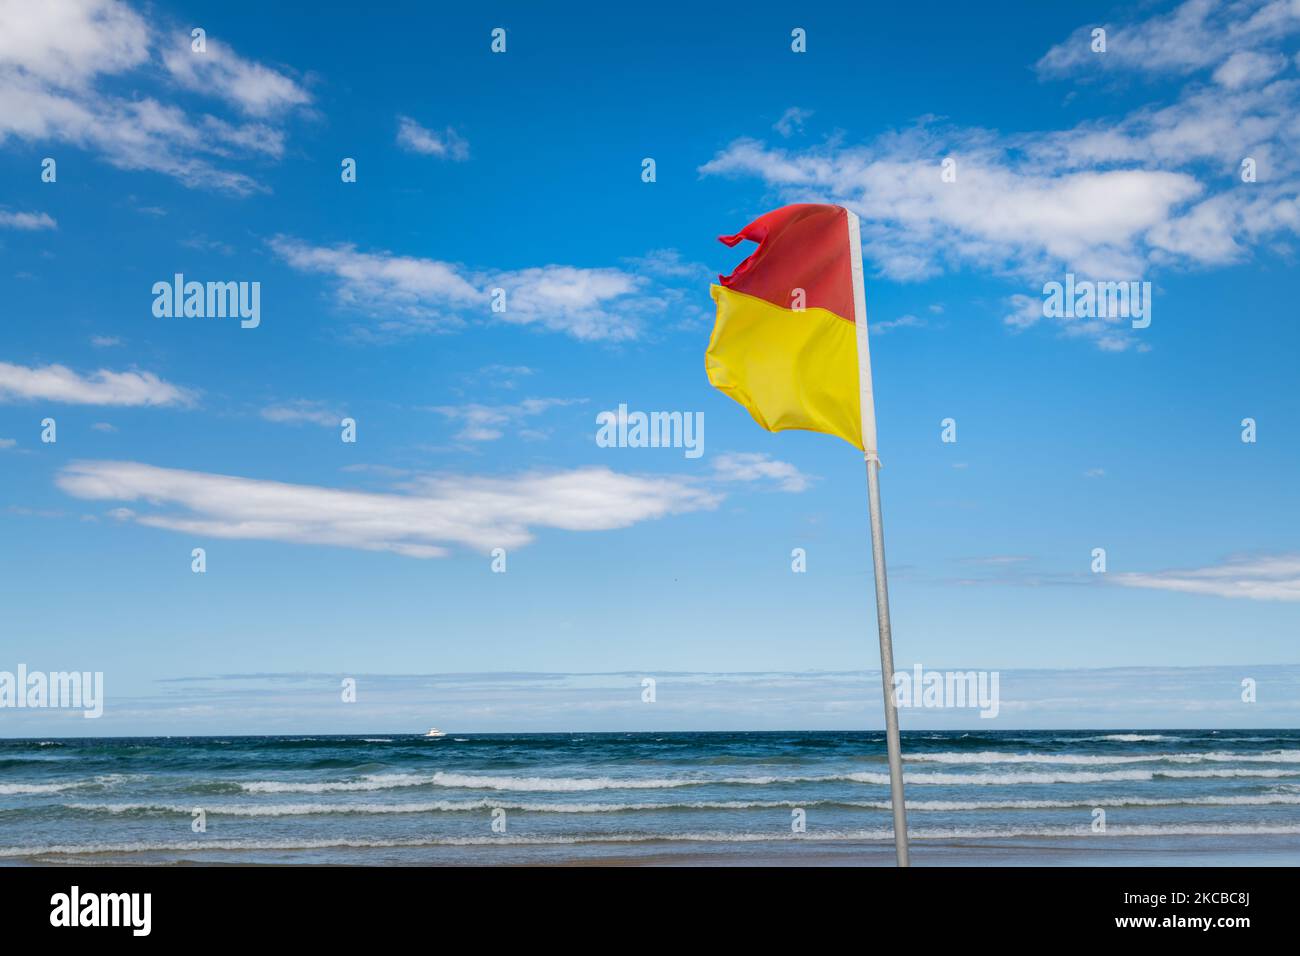 Red and Yellow Life Saving Flag on Gold Coast Beach Stock Photo